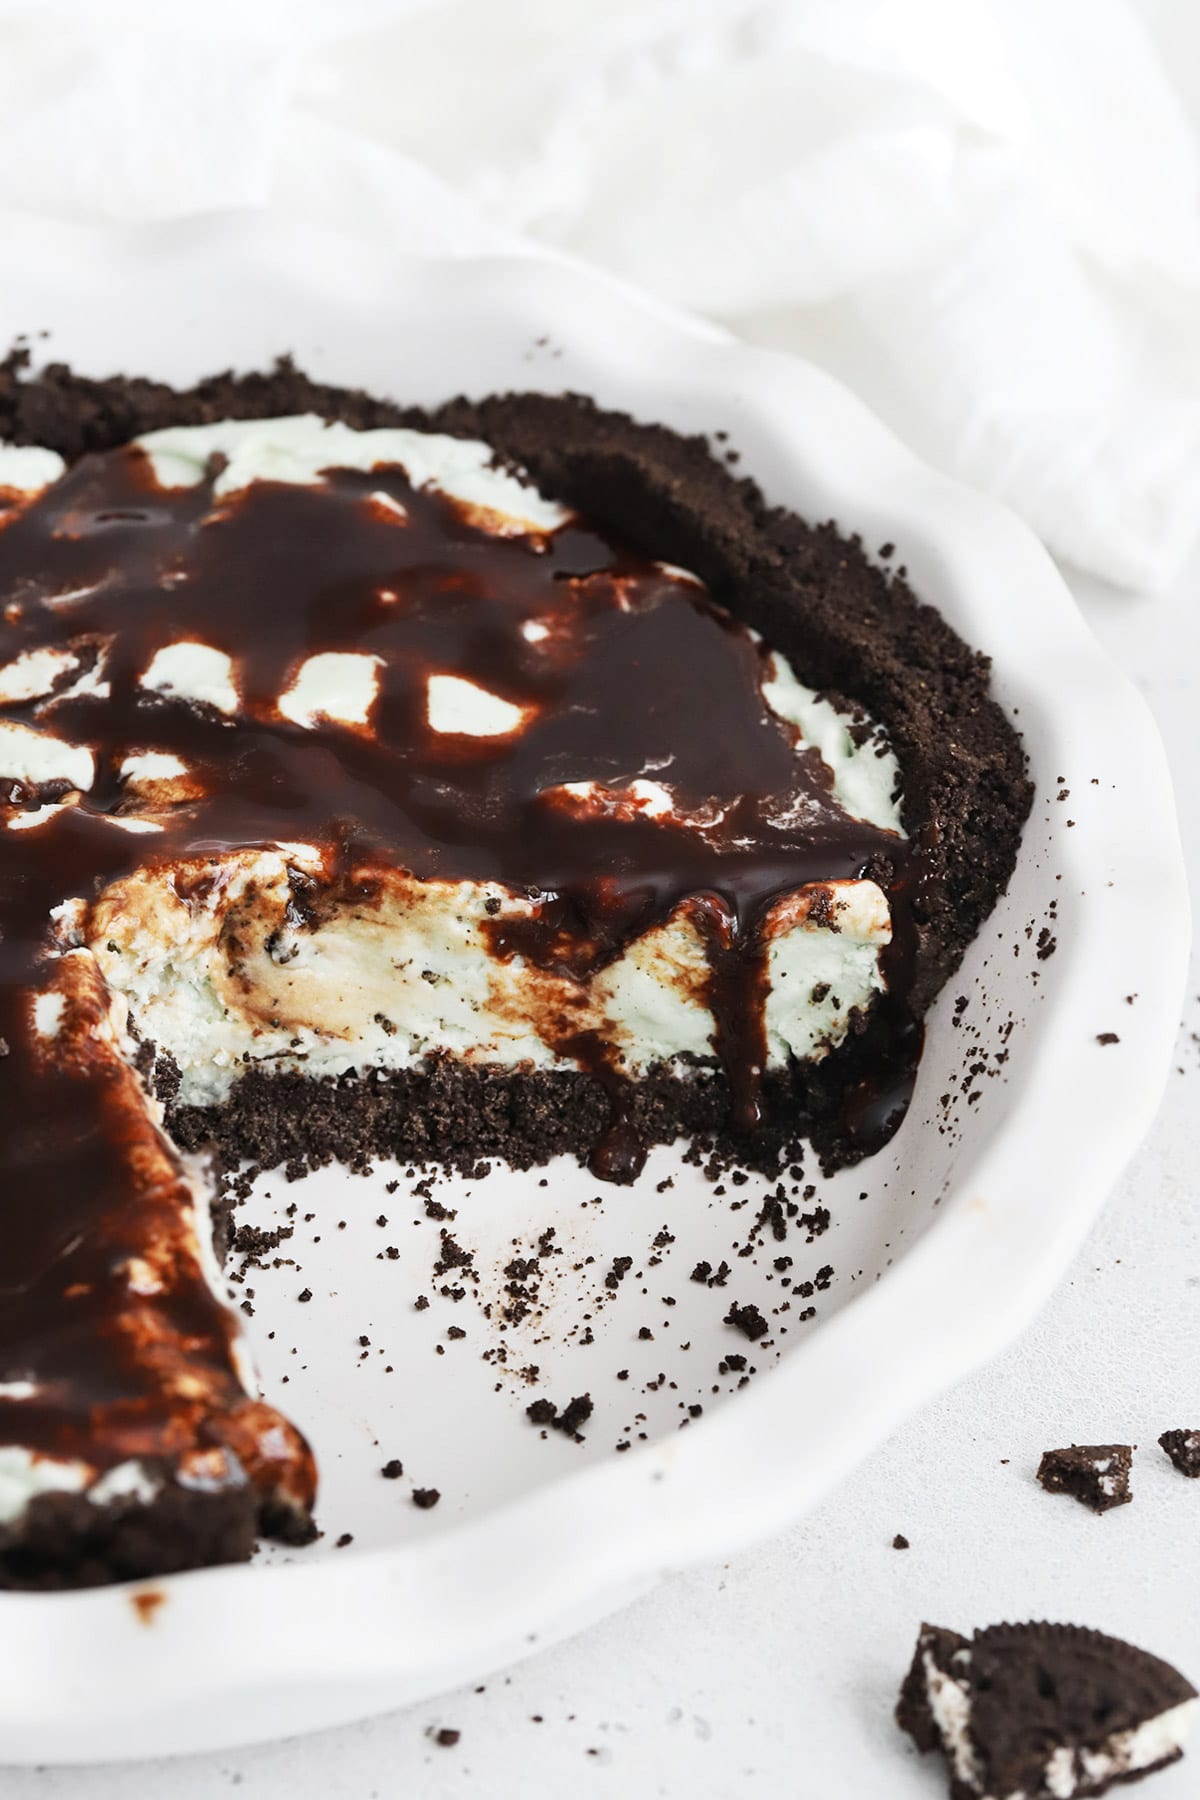 Front view of a gluten-free grasshopper pie covered with chocolate sauce